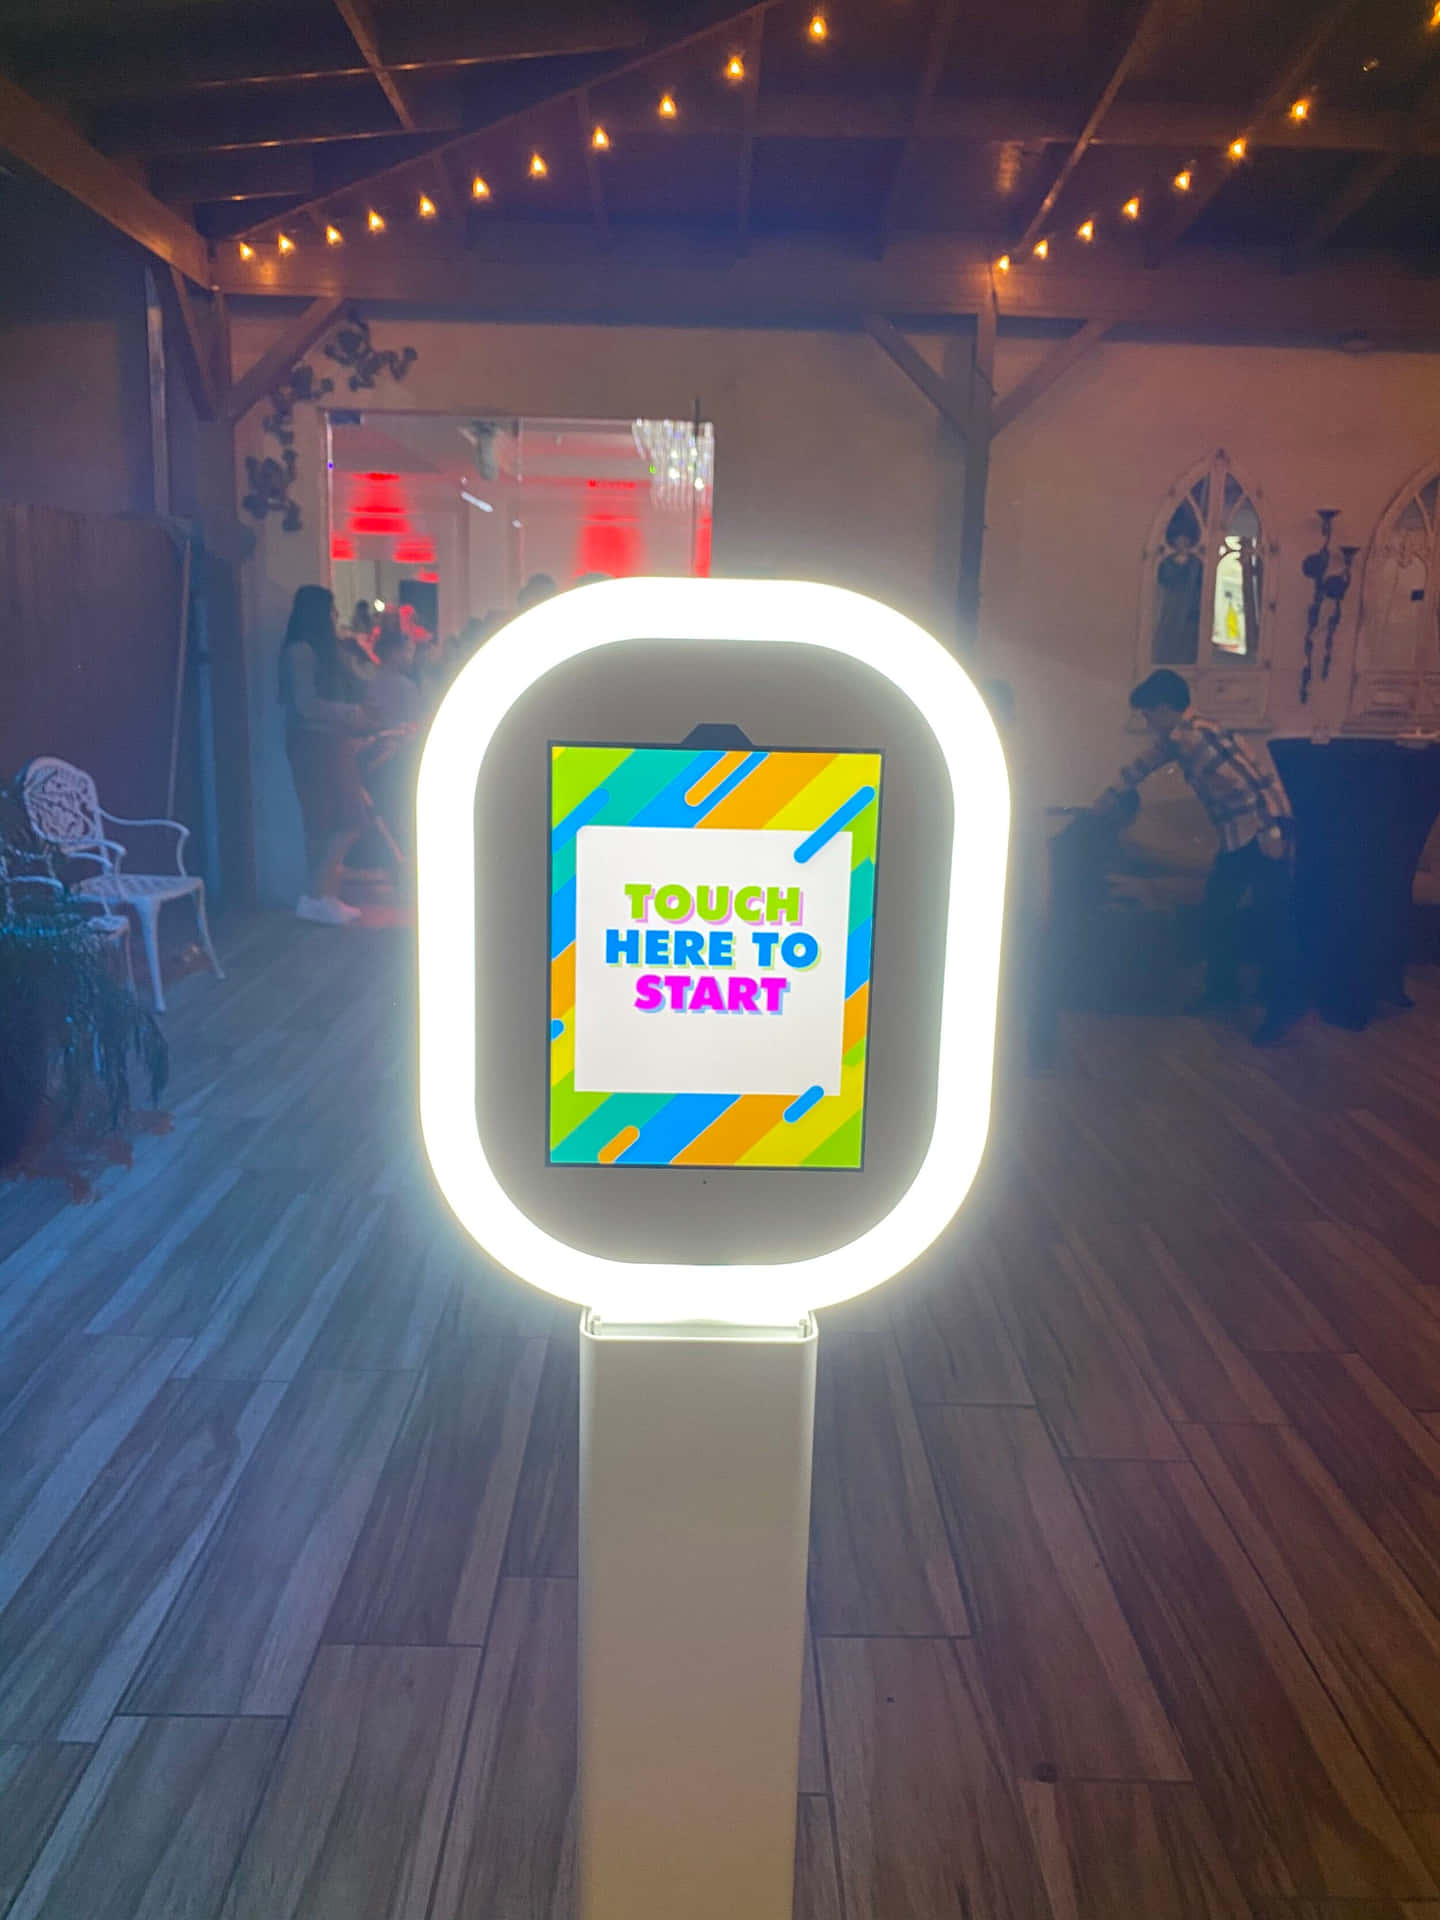 A Photo Booth With A Touch Screen Display